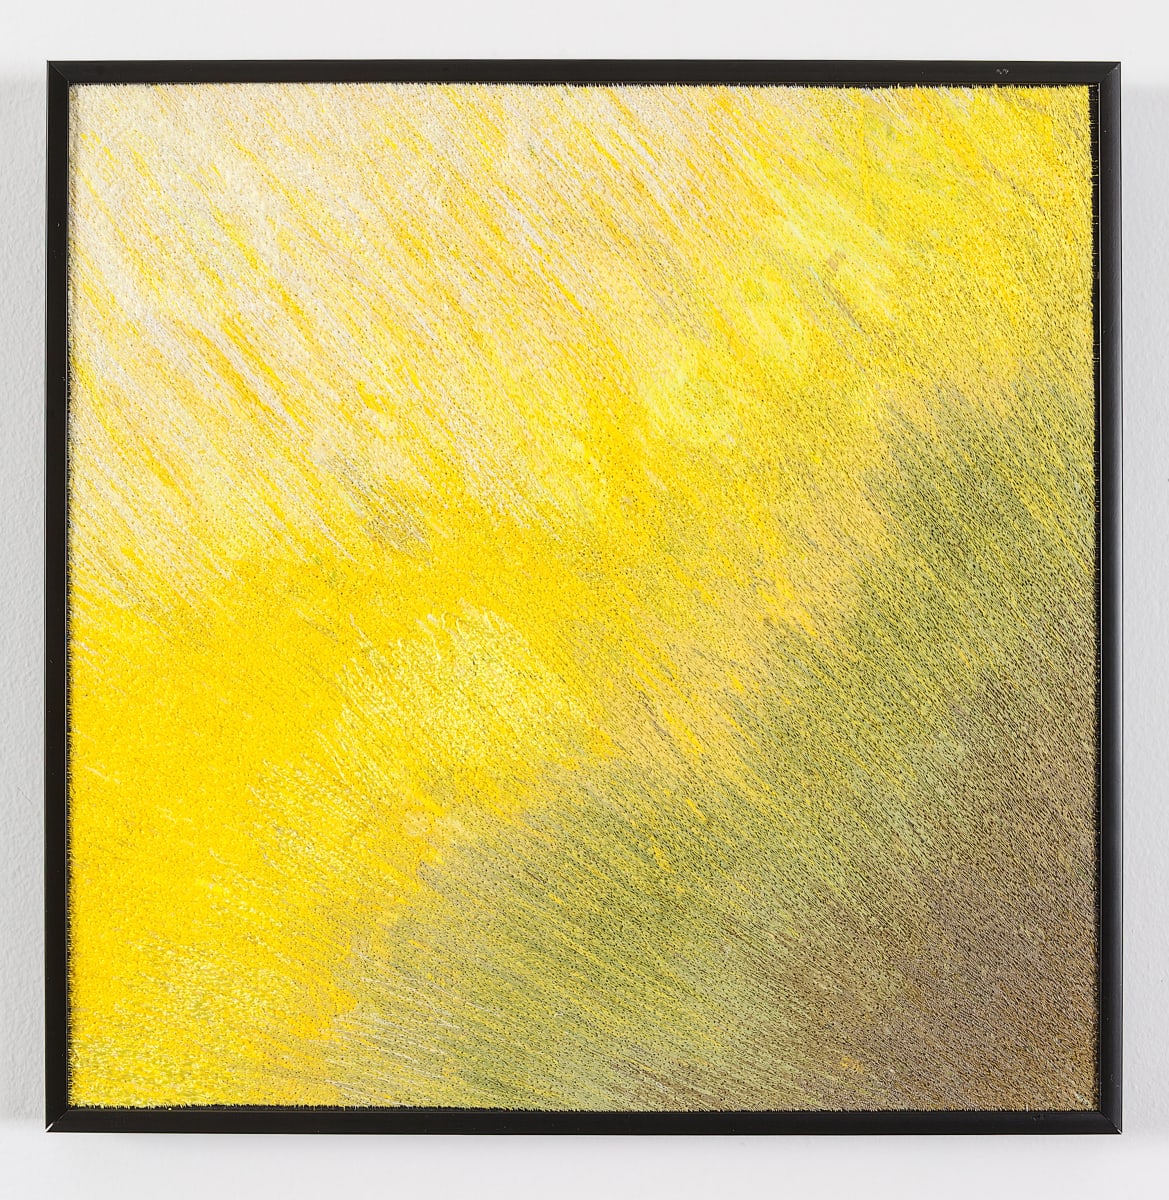 Synesthesia #1 Yellow by Lesley Turner  Image: Lesley Turner, 'Synesthesia #1 Yellow', 13x13x0.5". Working monochromatically I focused on expressing the color’s radiating energy through line and value. Photo: Tony Bounsall Photo-Design